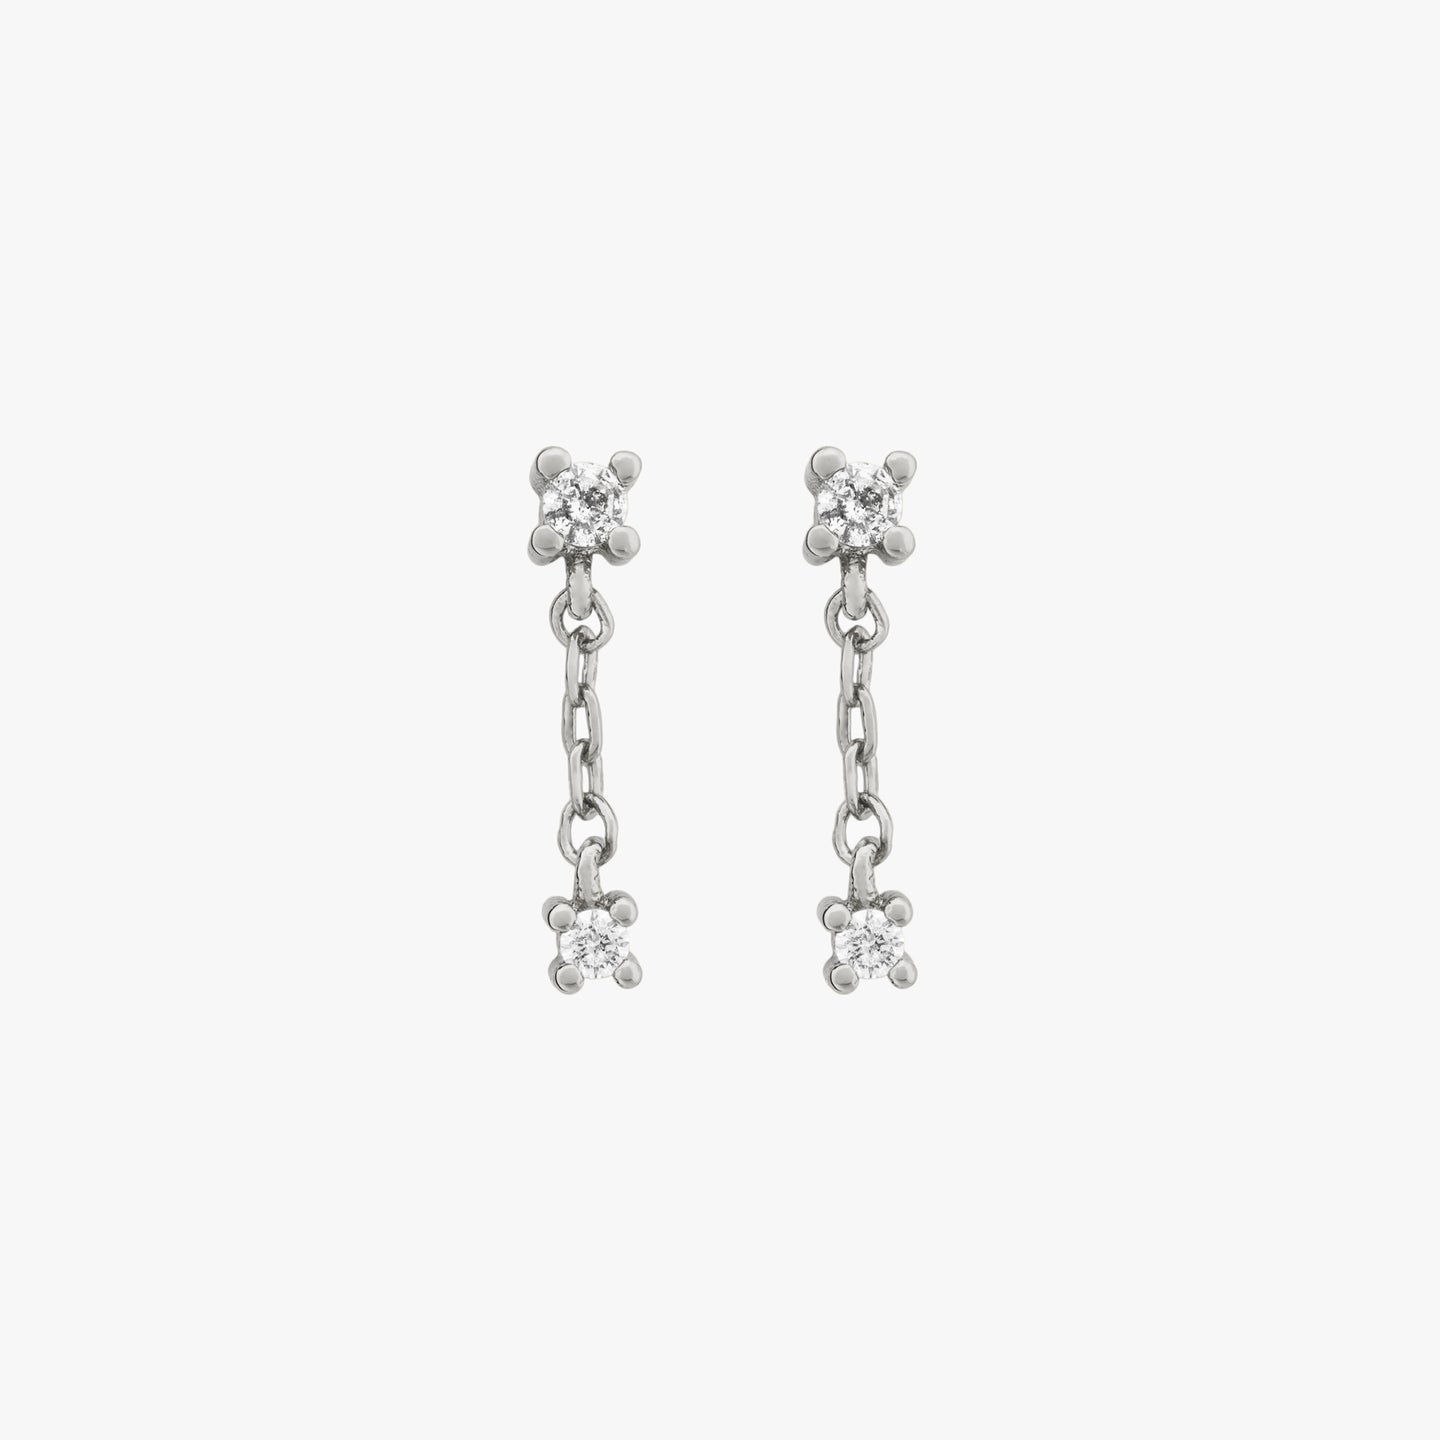 This is a small cz stud with a dangling cz connected by a silver chain [pair] color:null|silver/clear